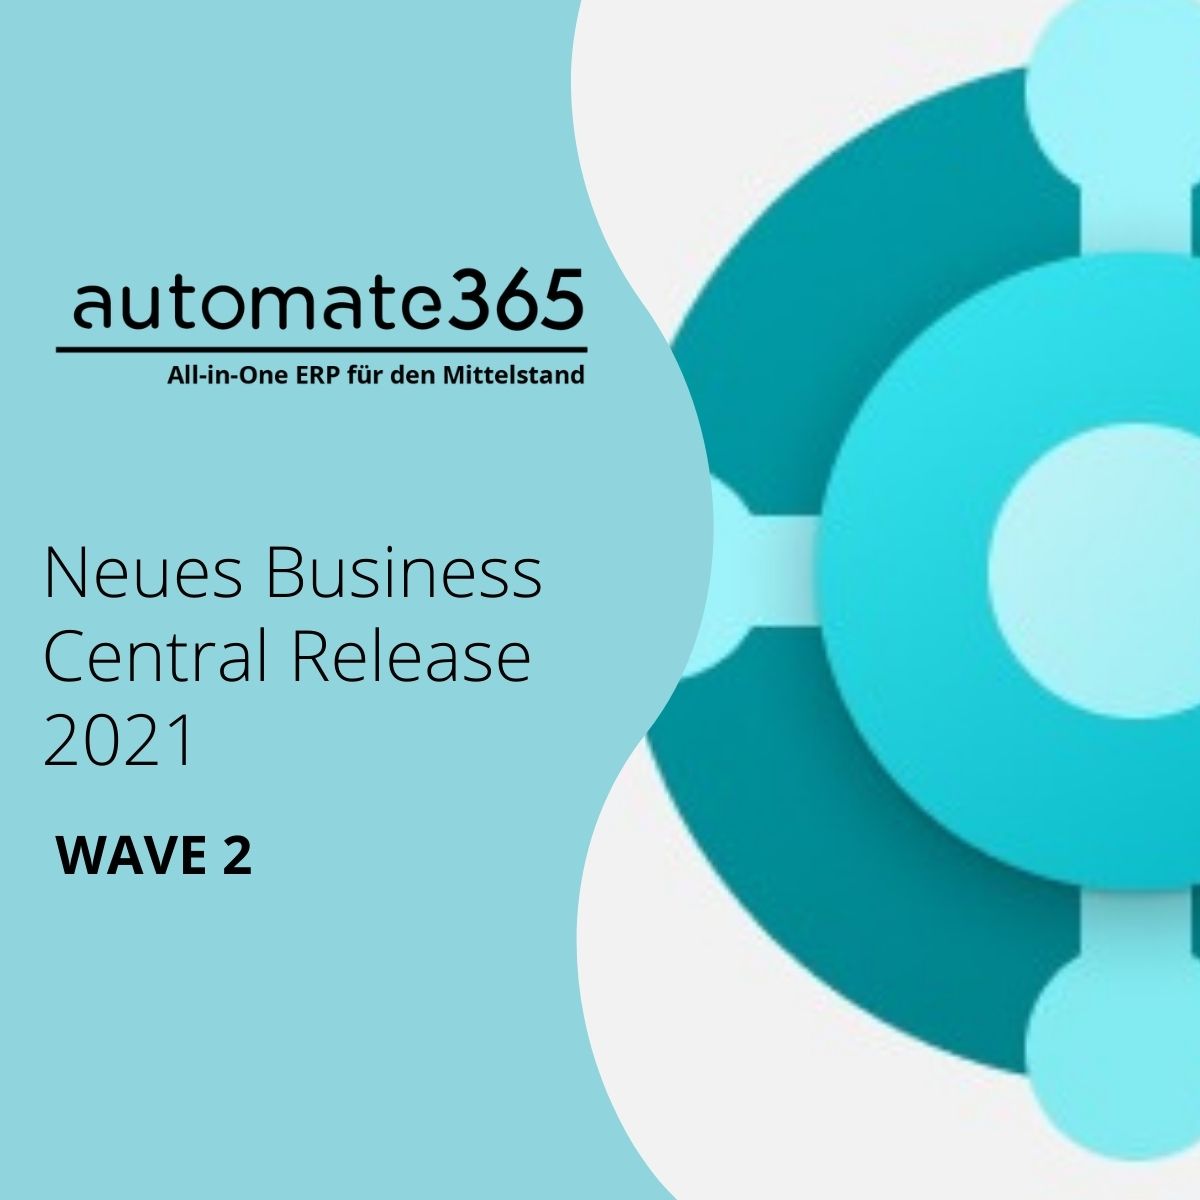 Neues Business Central Release 2021 Wave 2